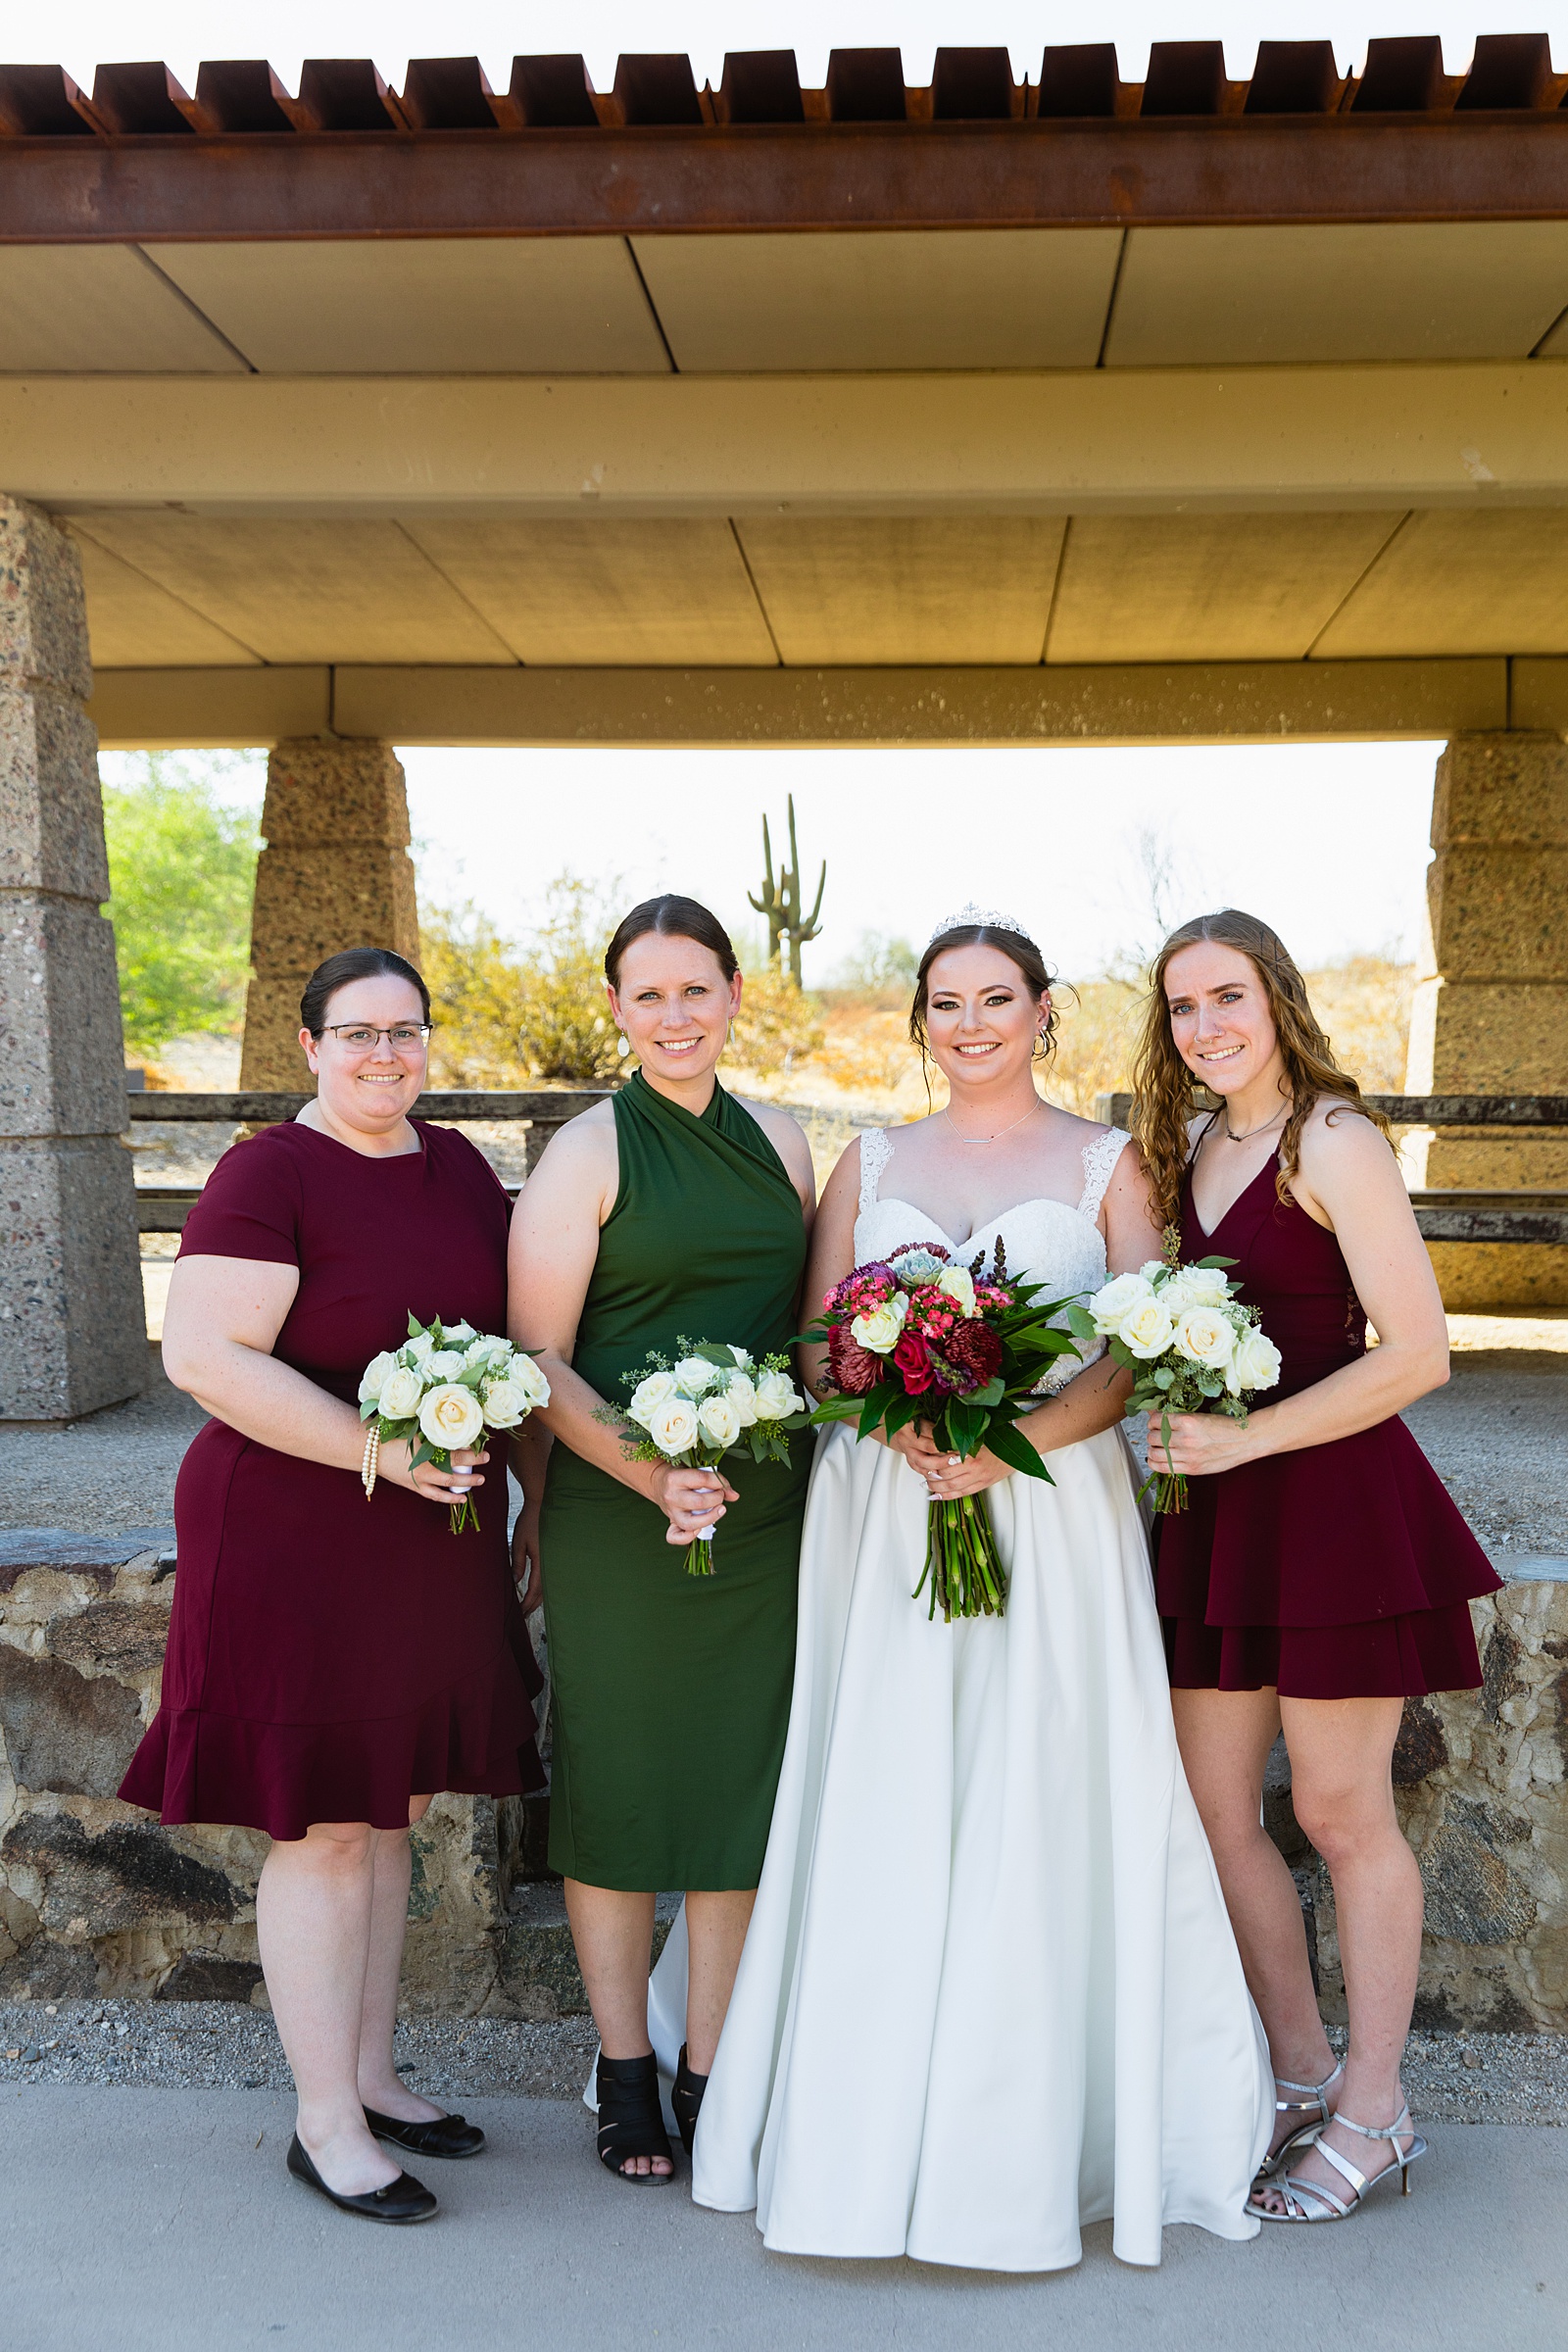 Bride and bridesmaids outfit details by Juniper and Co Photography.